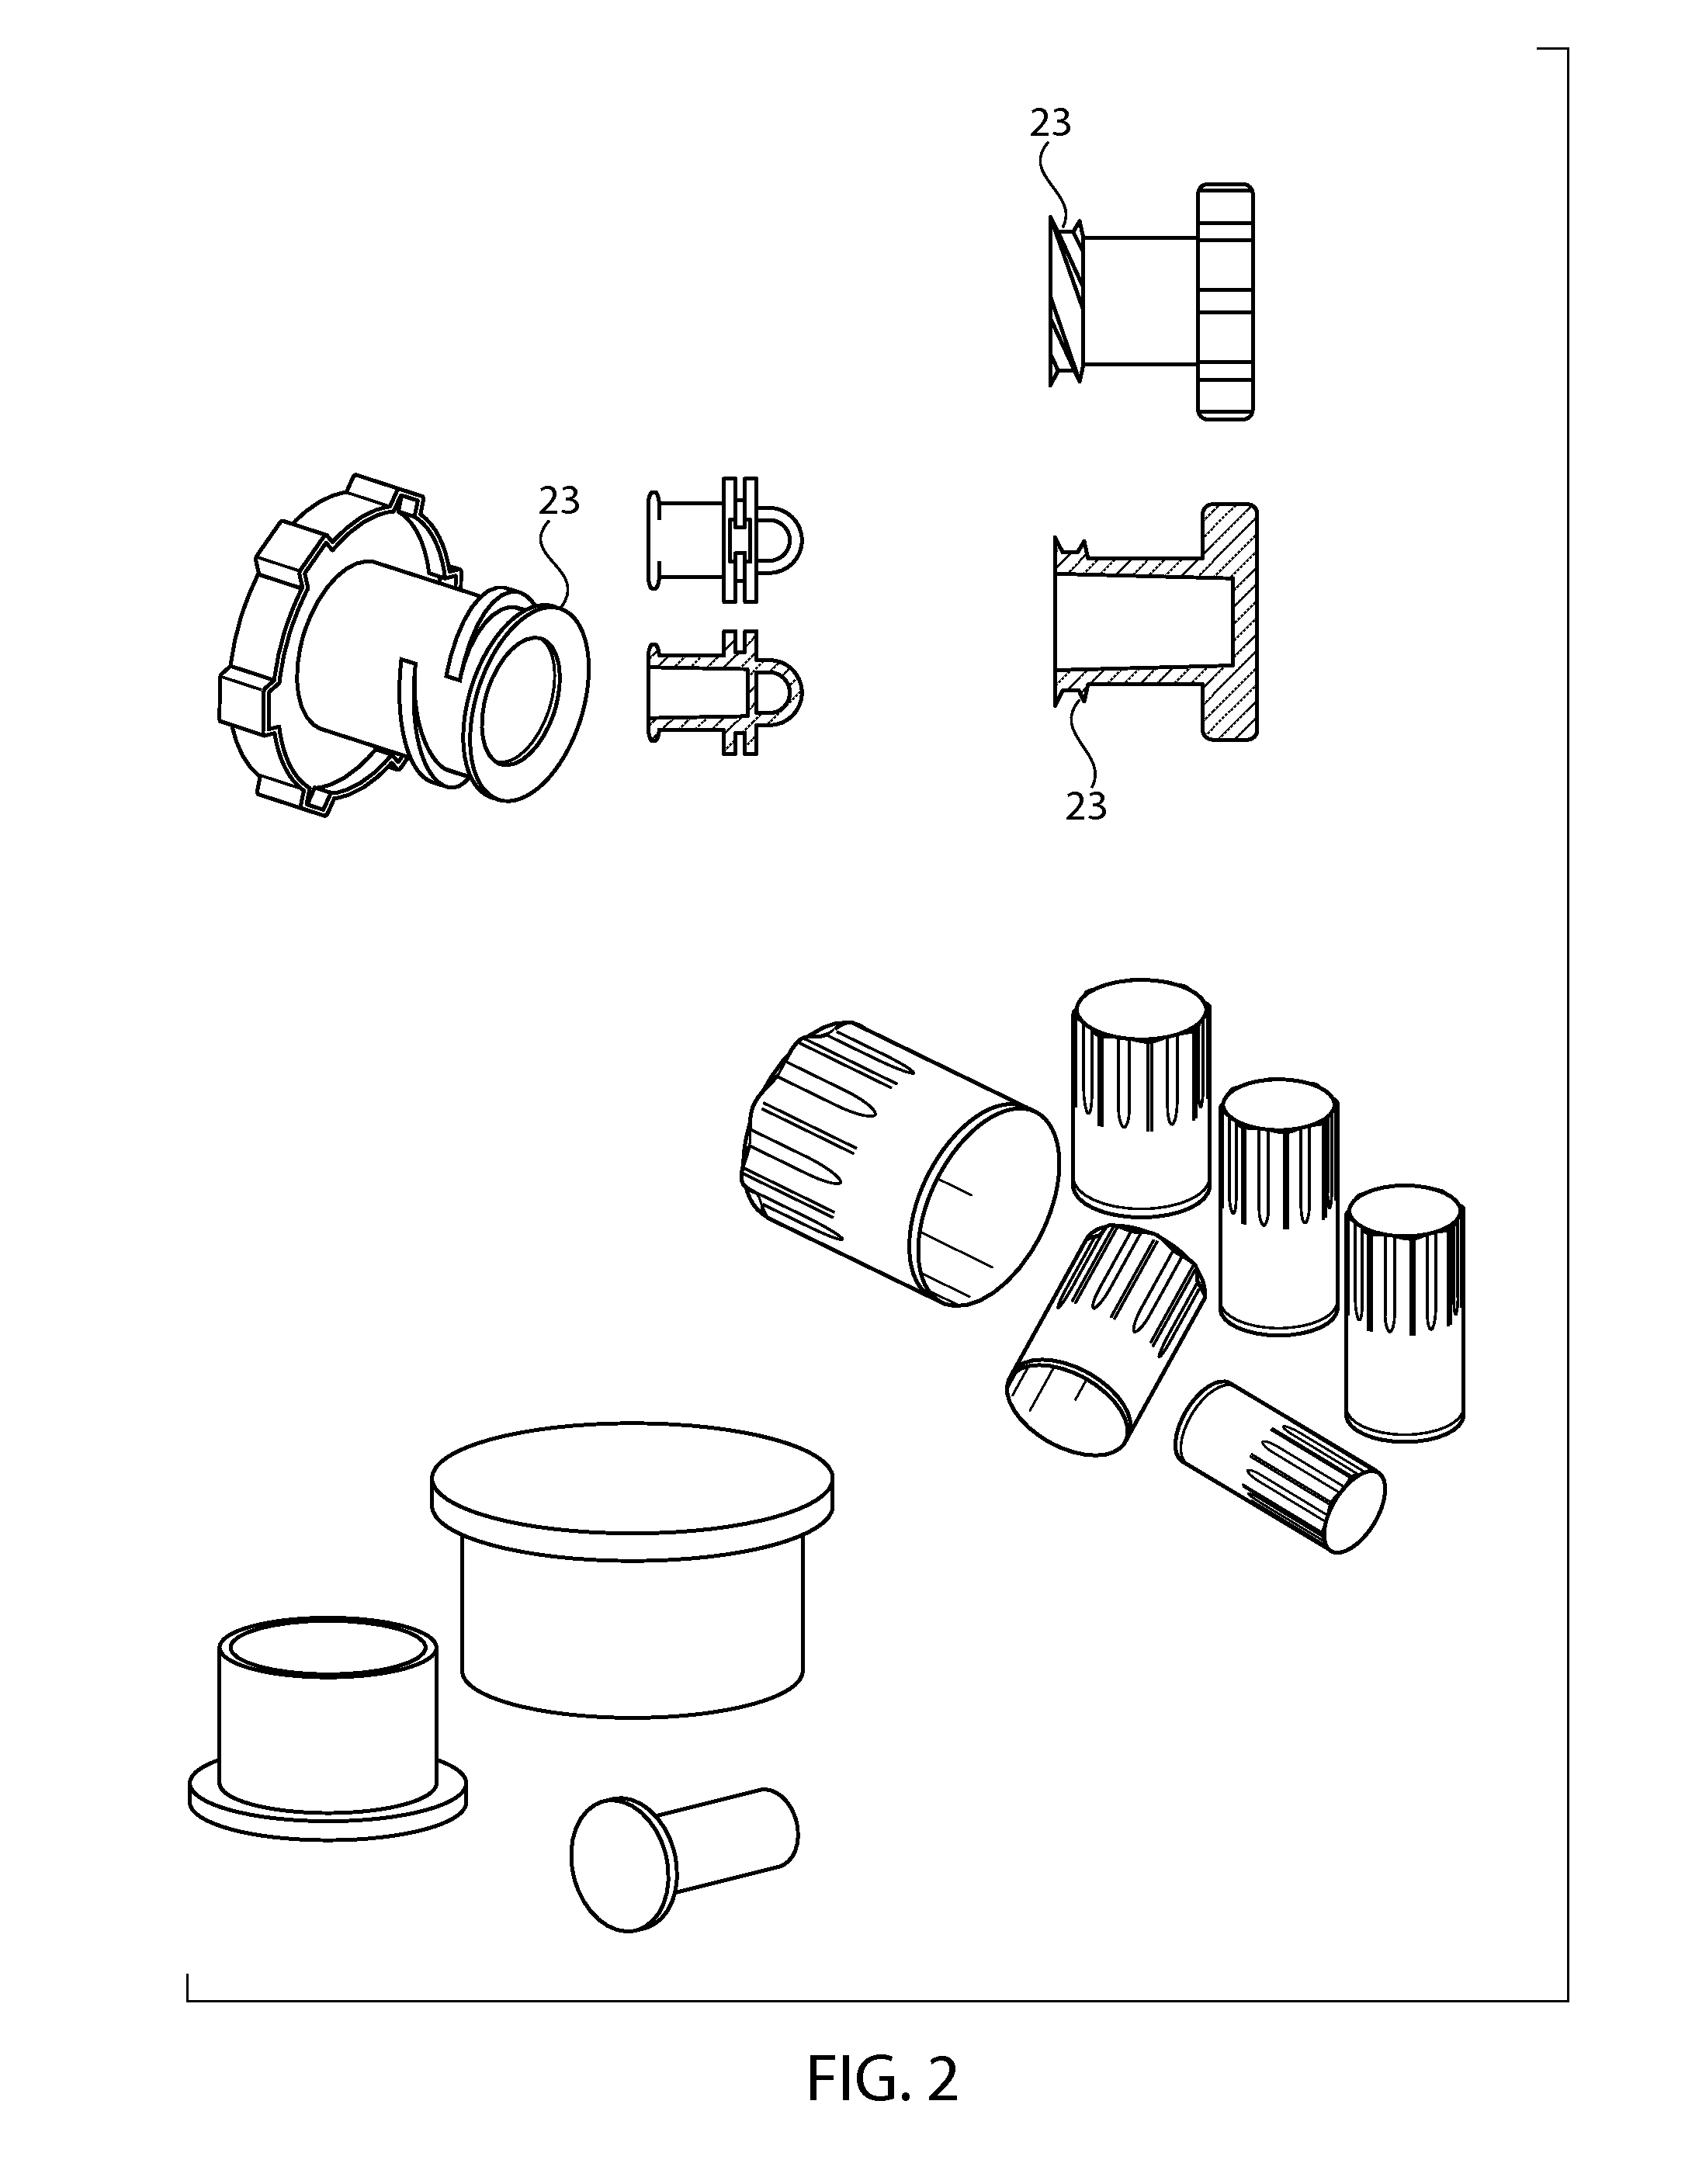 Sintered porous polymeric caps and vents for components of medical devices